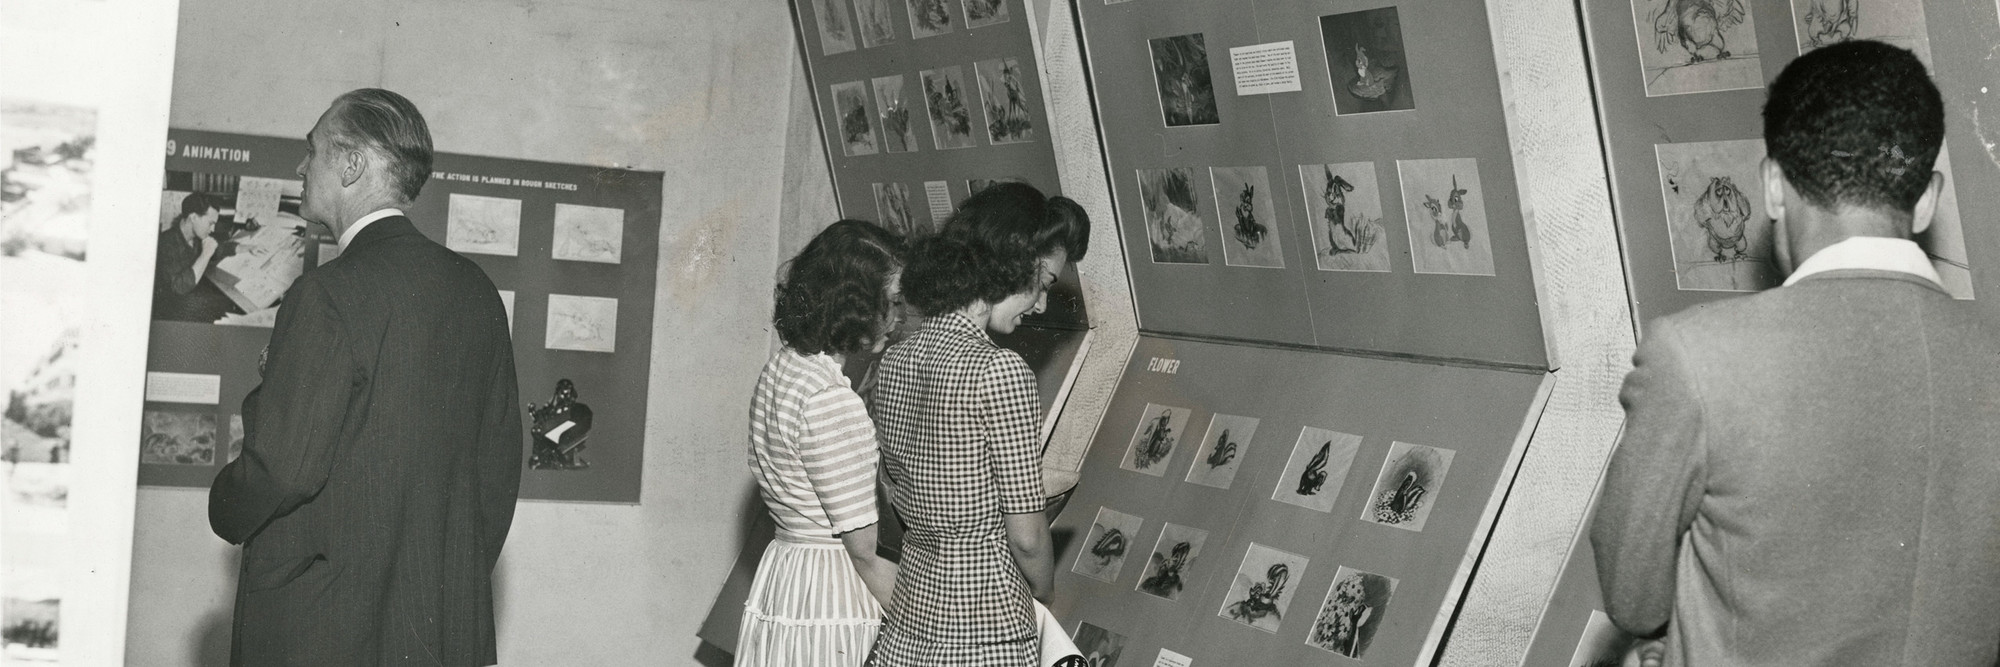 Installation view of Bambi: The Making of an Animated Sound Picture at The Museum of Modern Art, New York